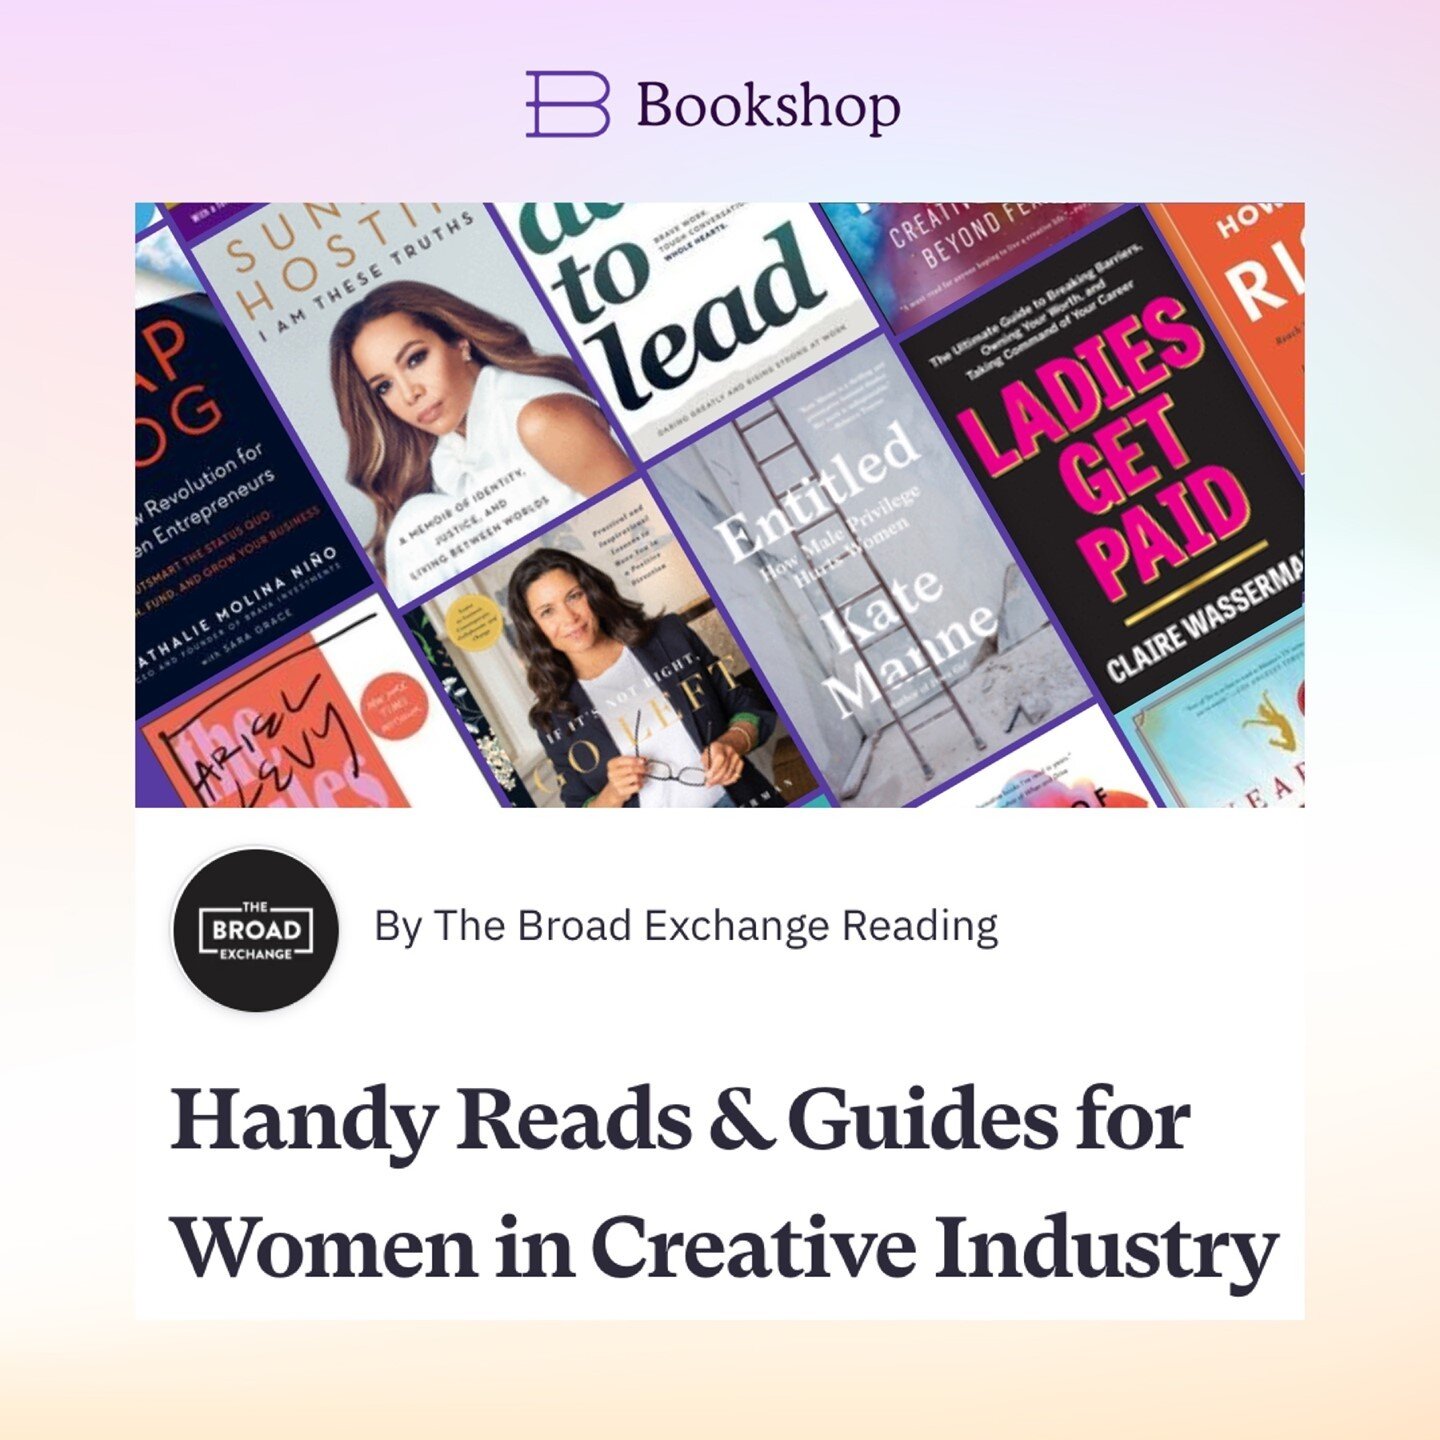 @Bookshop_org is featuring our collection of books we curated that helped us when there wasn&rsquo;t an official manual to lean on in our careers (💫 link in bio). We&rsquo;re excited to have our mission and tools recognized on such a scale! 

📚What